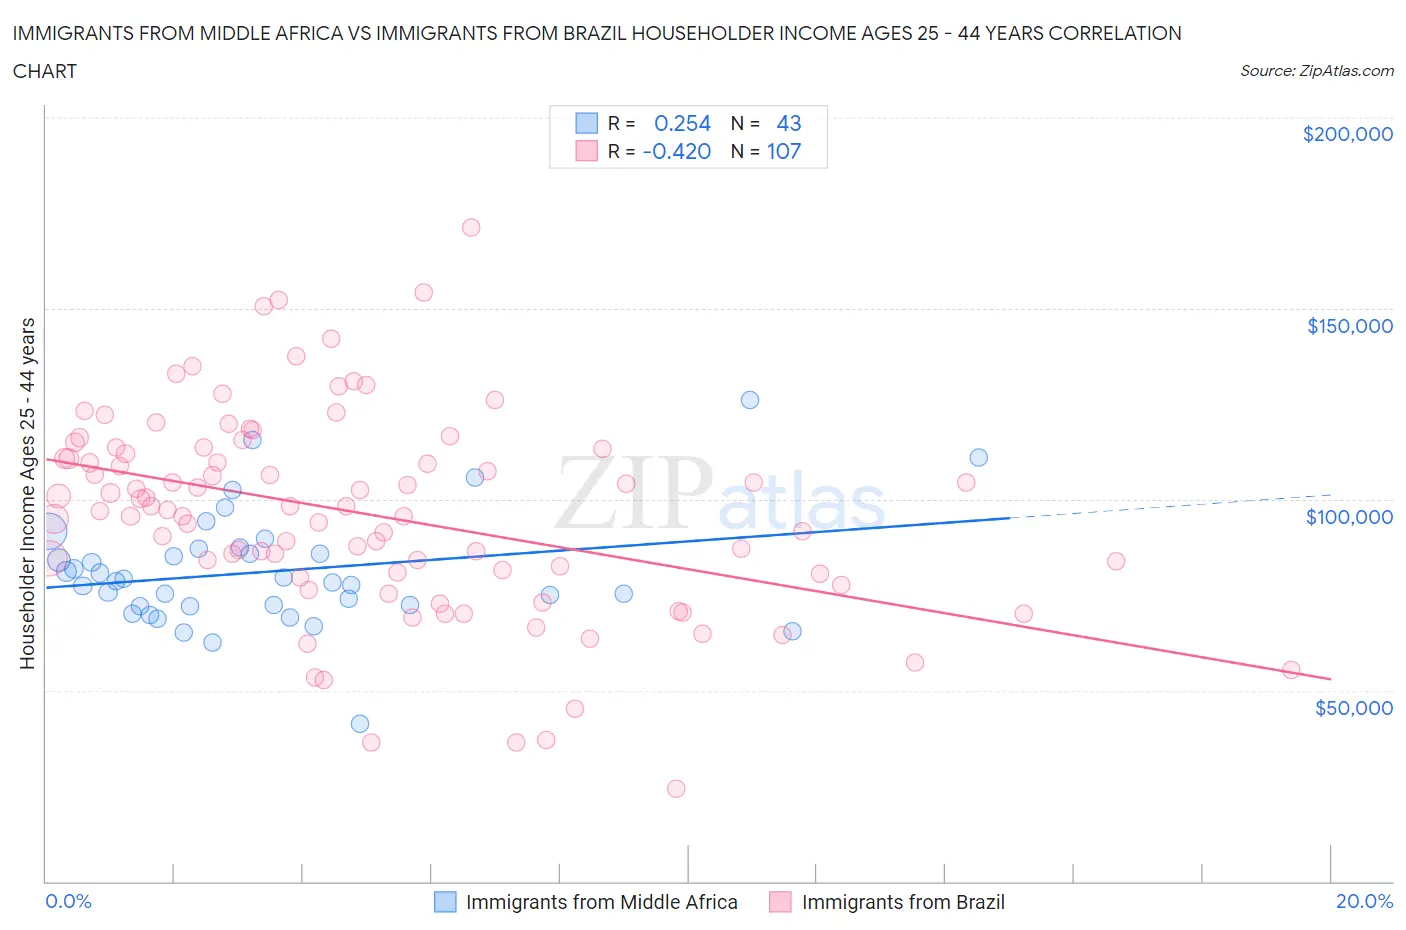 Immigrants from Middle Africa vs Immigrants from Brazil Householder Income Ages 25 - 44 years